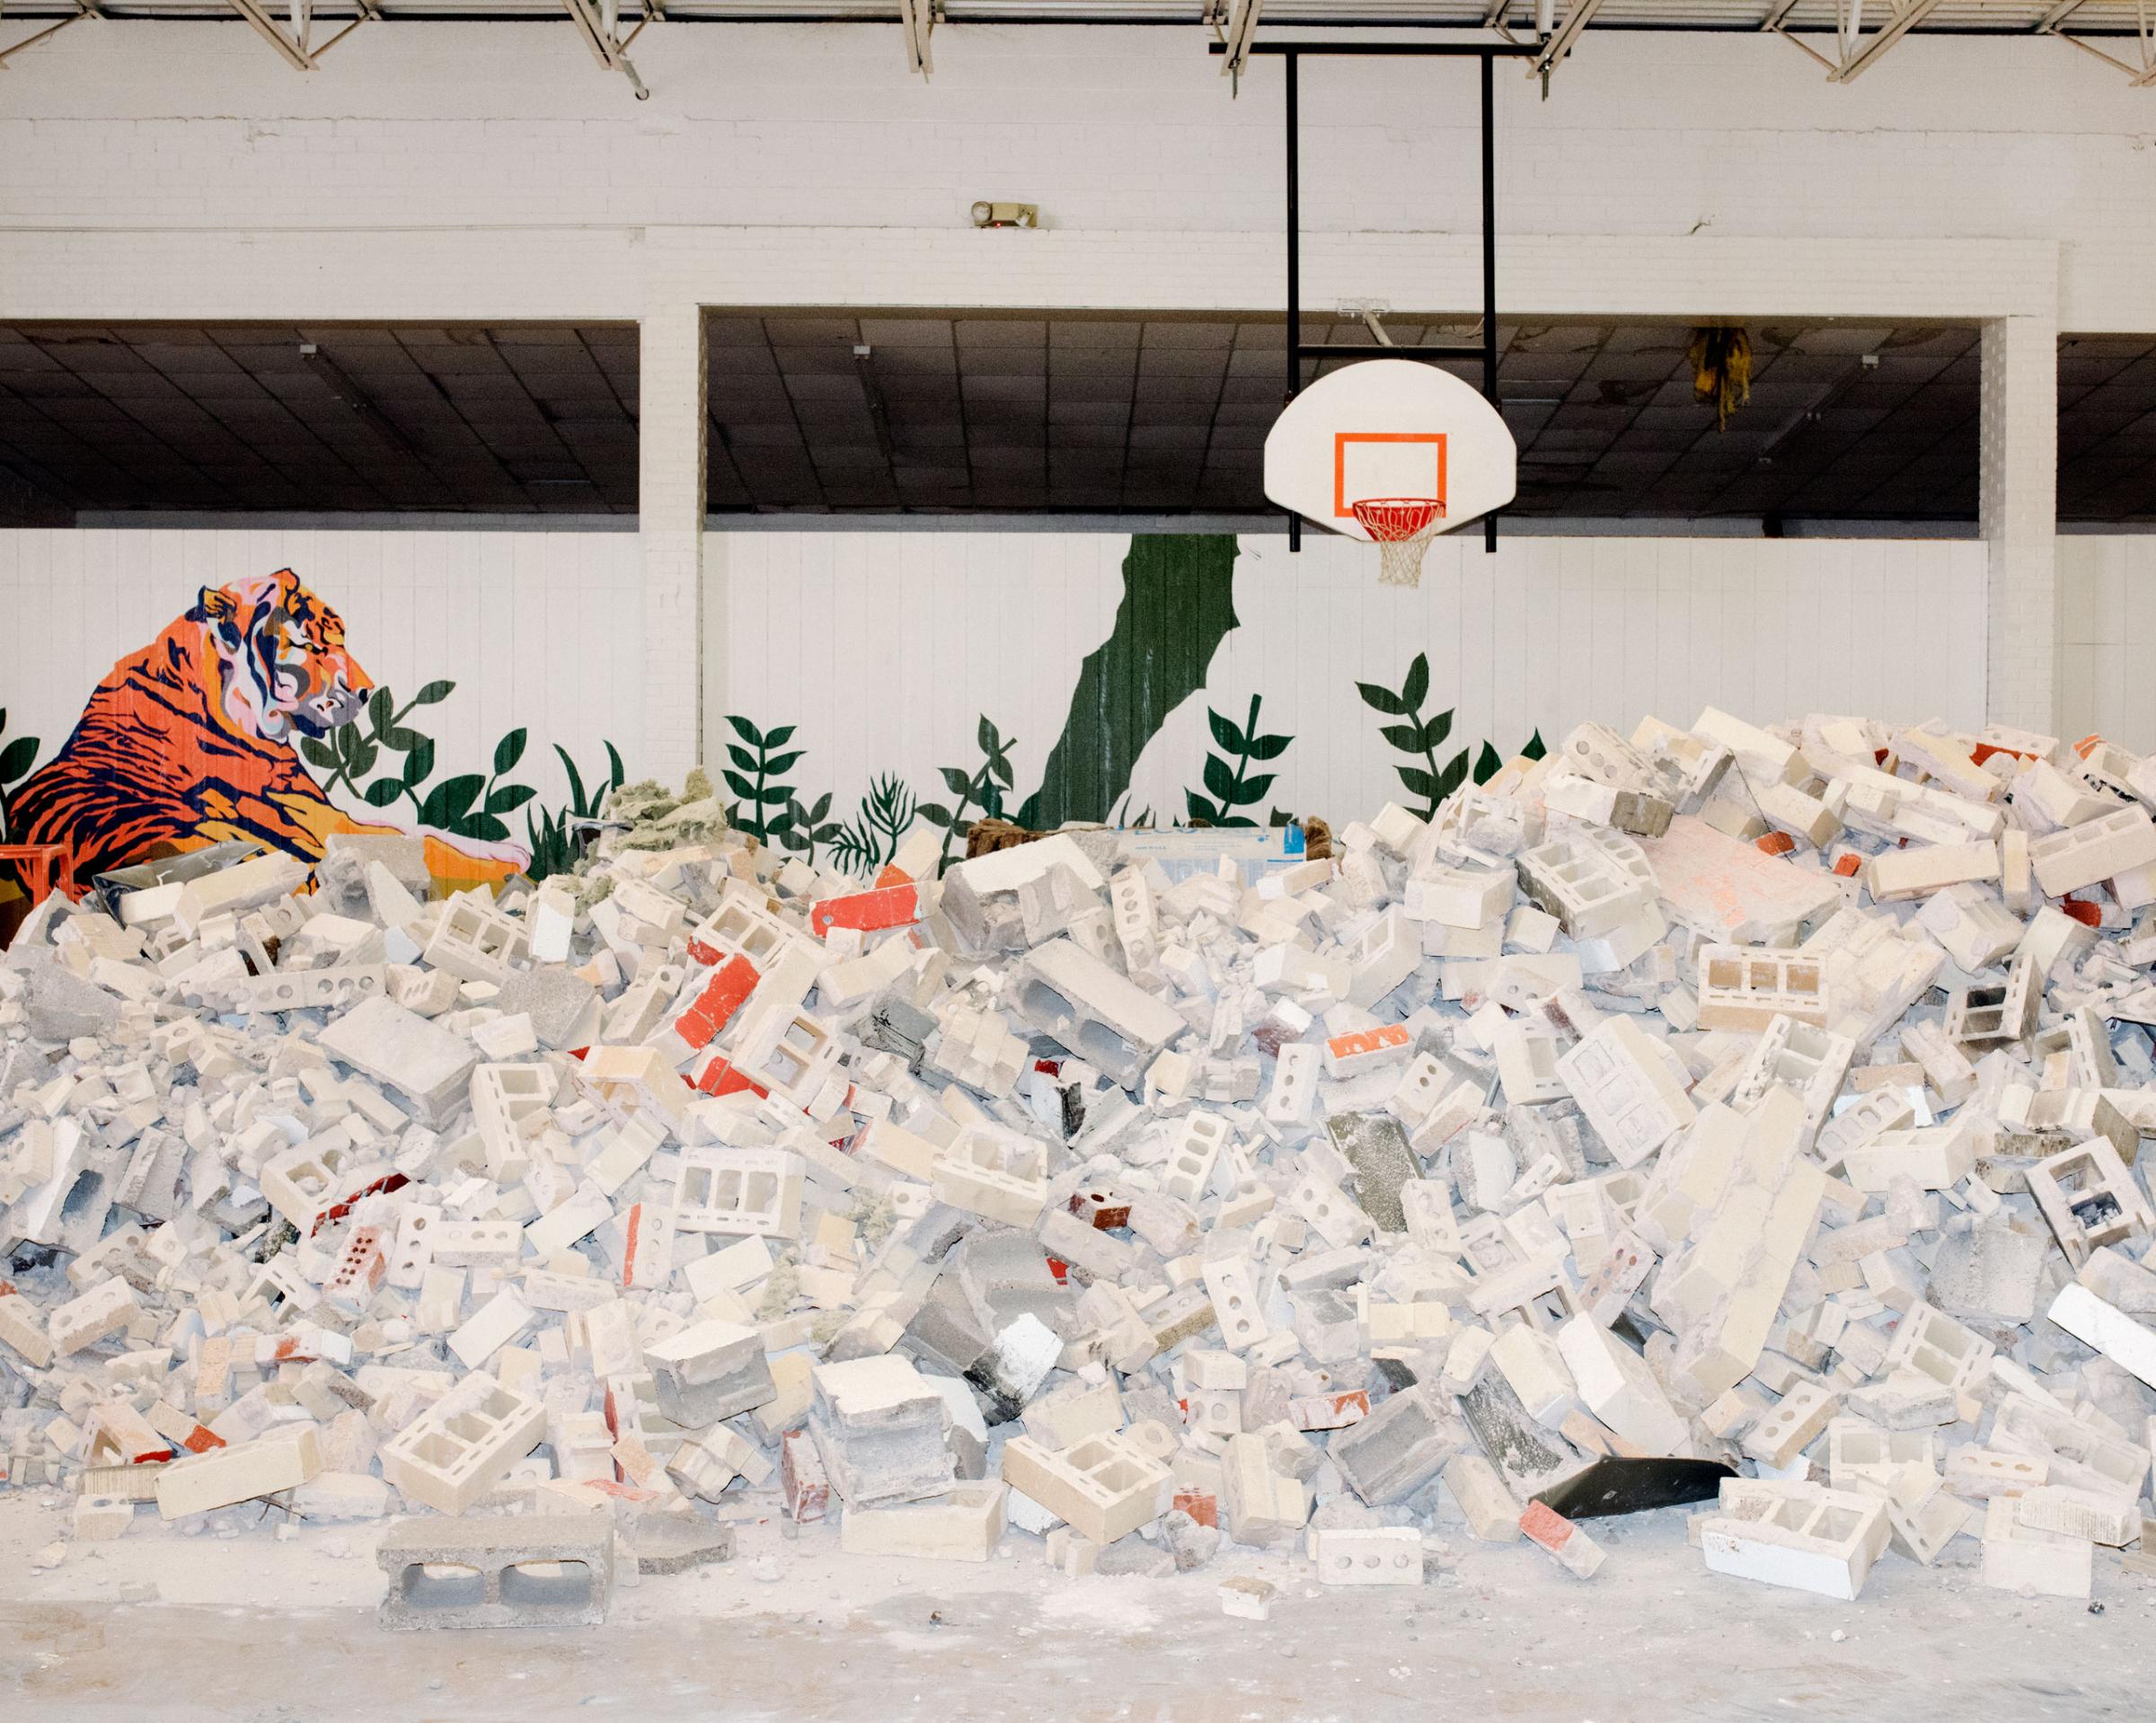 Cinder blocks left from demolition are piled in Crescent High School’s gymnasium. An earthquake on July 28, 2015 destabilized the gymnasium’s walls forcing the school to repair the entire structure, Crescent, OK